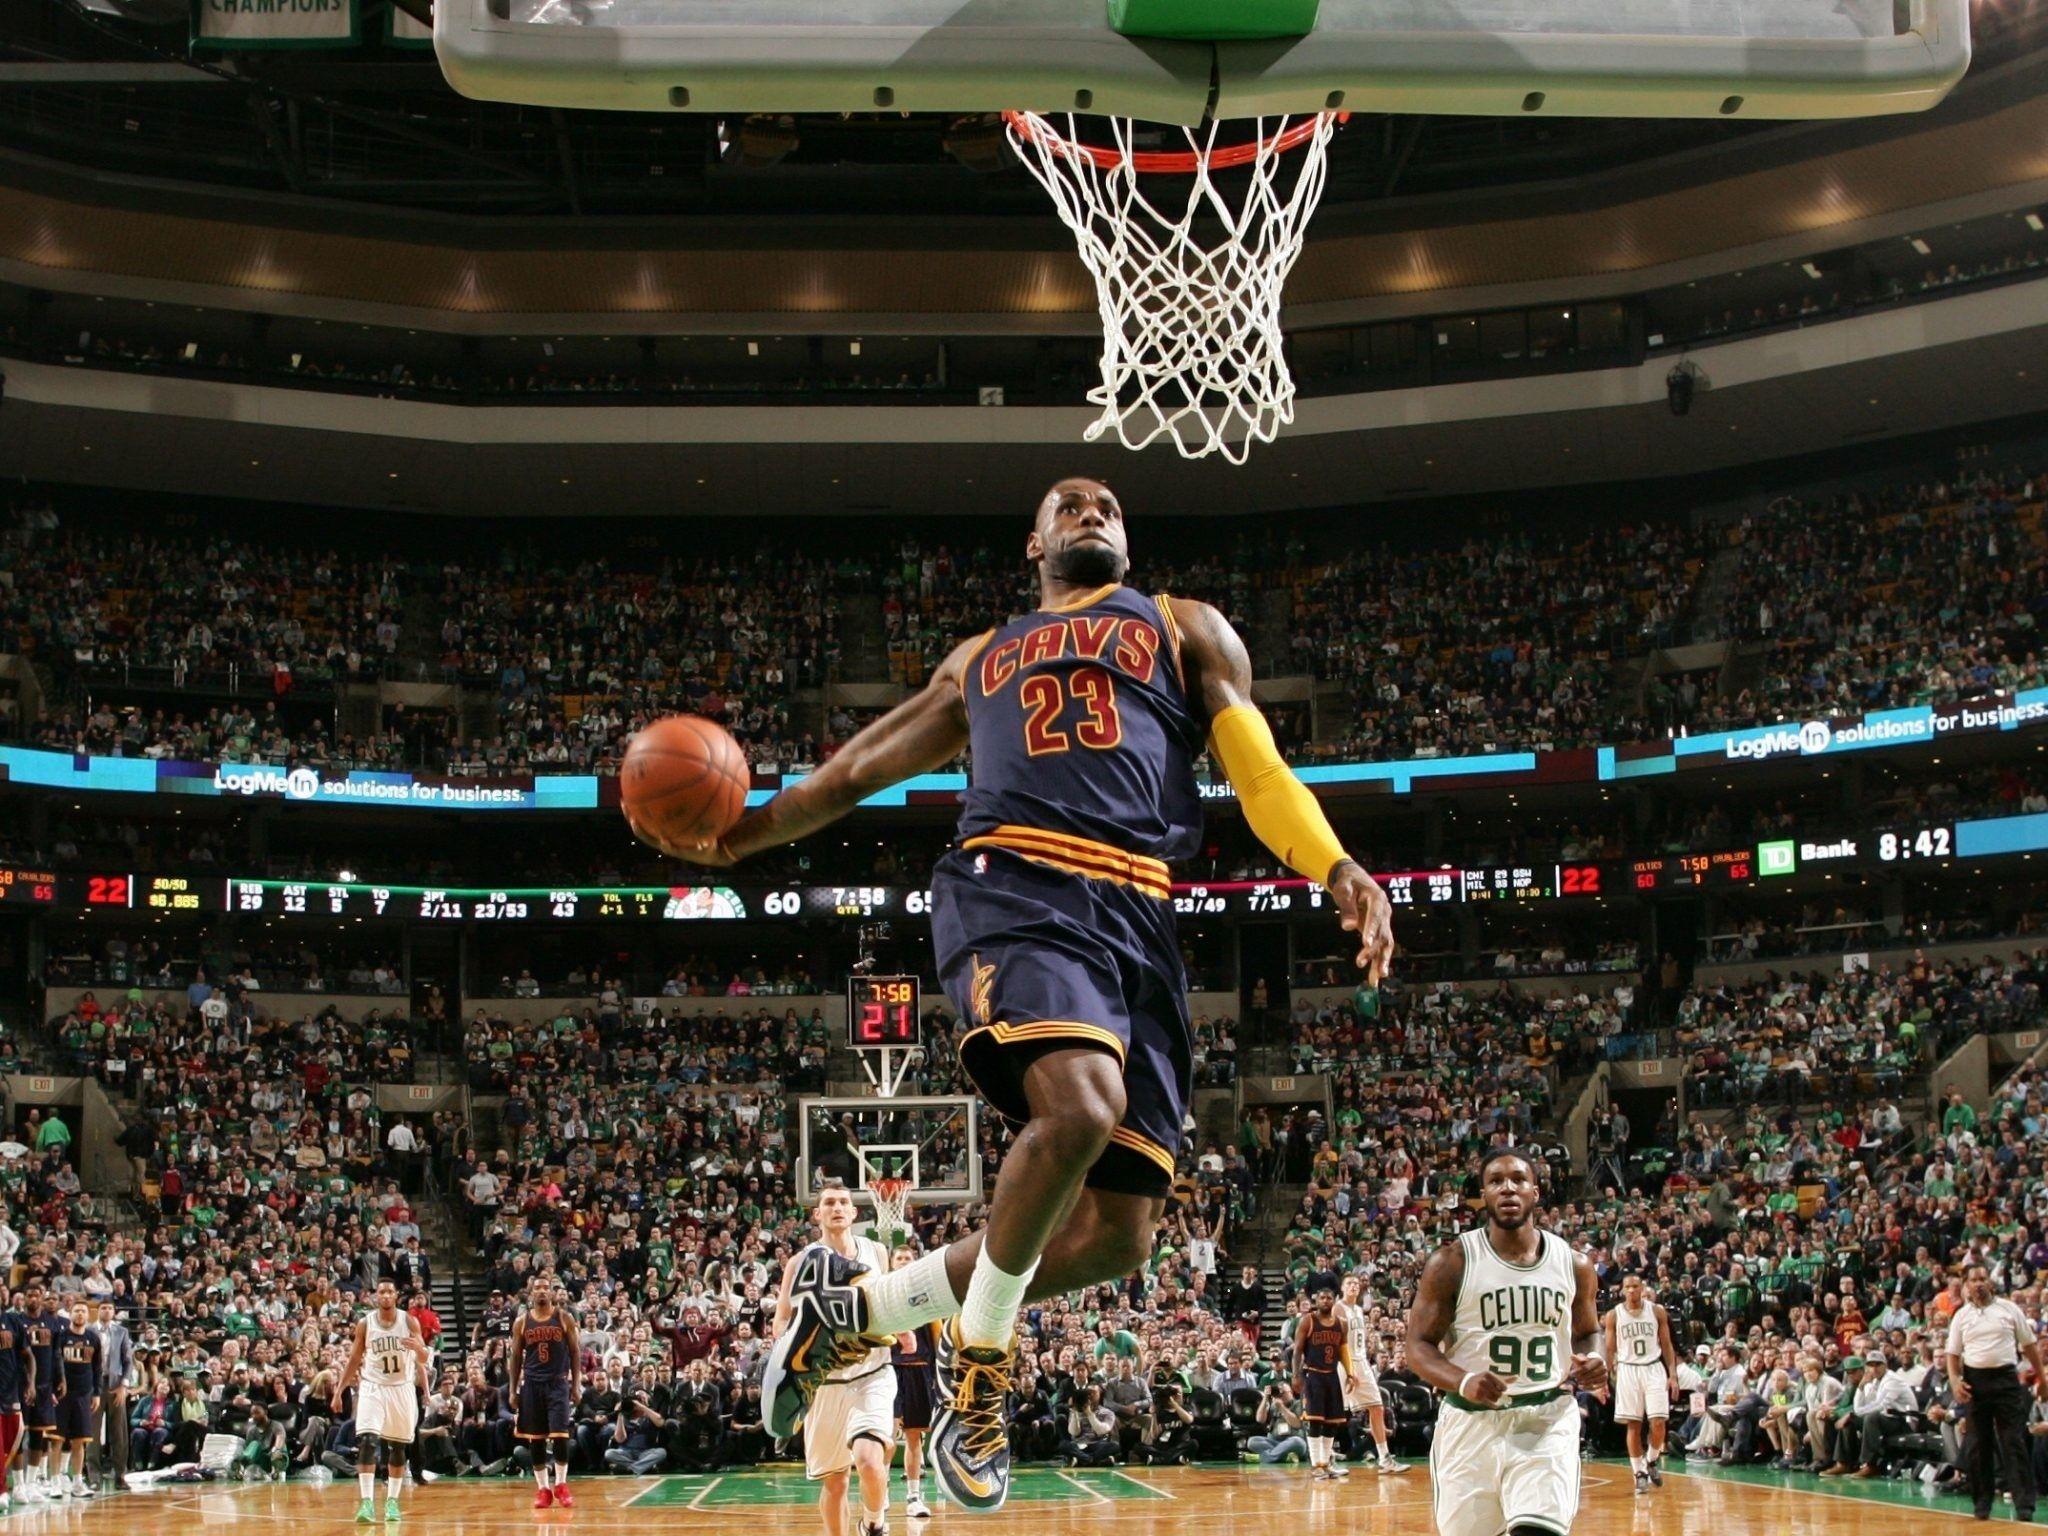 Latest Lebron James Dunks Image FULL HD 1080p For PC Background